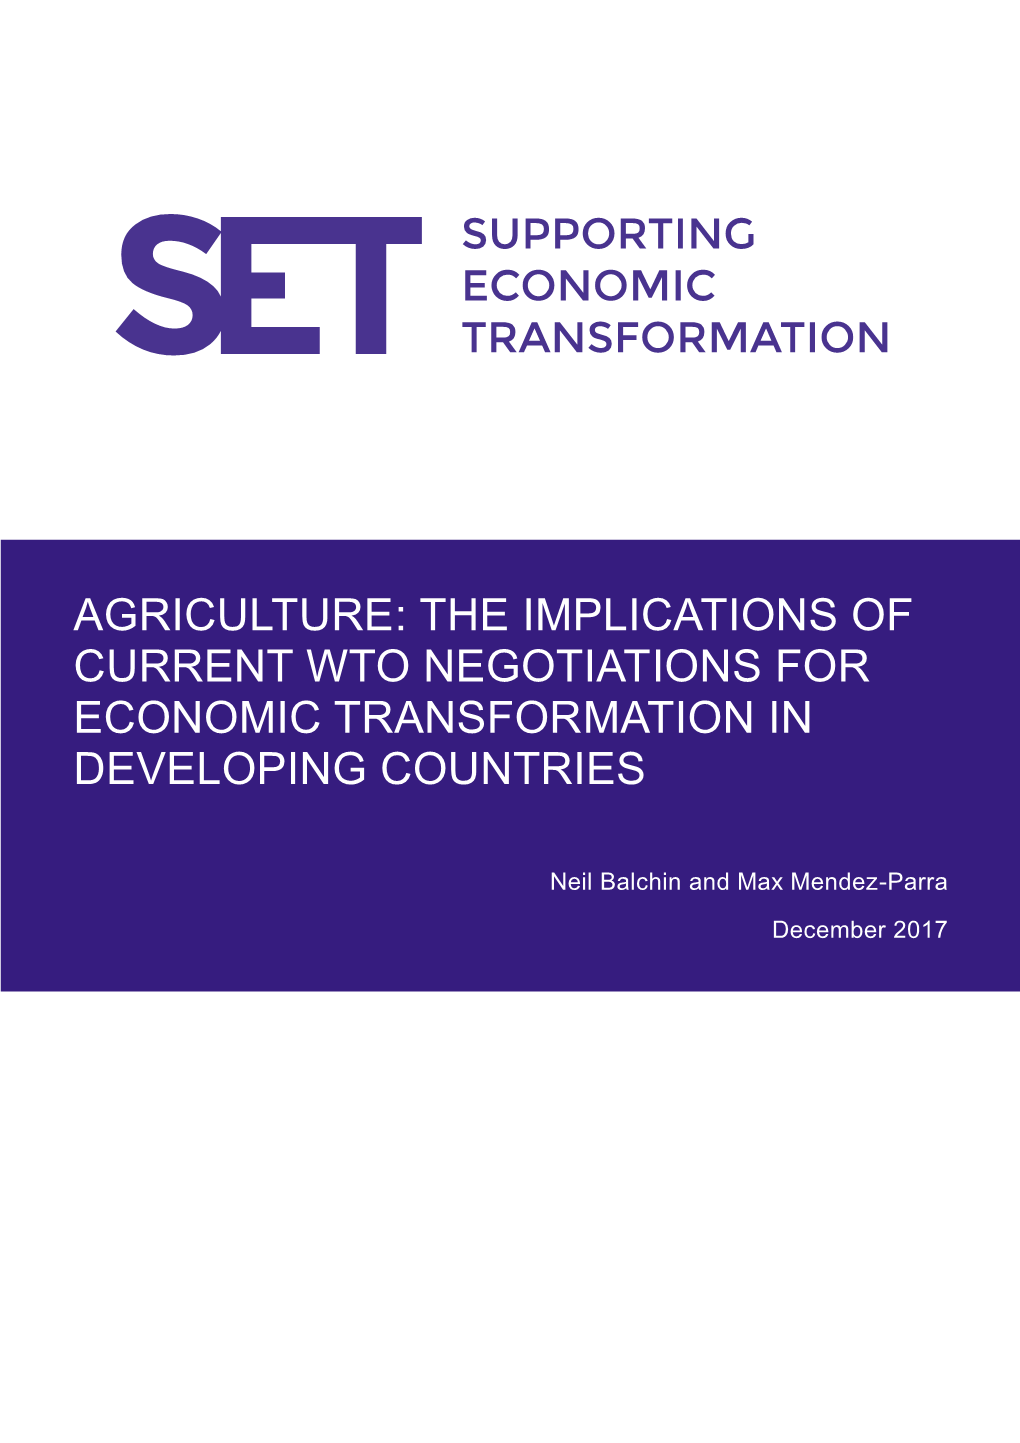 Agriculture: the Implications of Current Wto Negotiations for Economic Transformation in Developing Countries